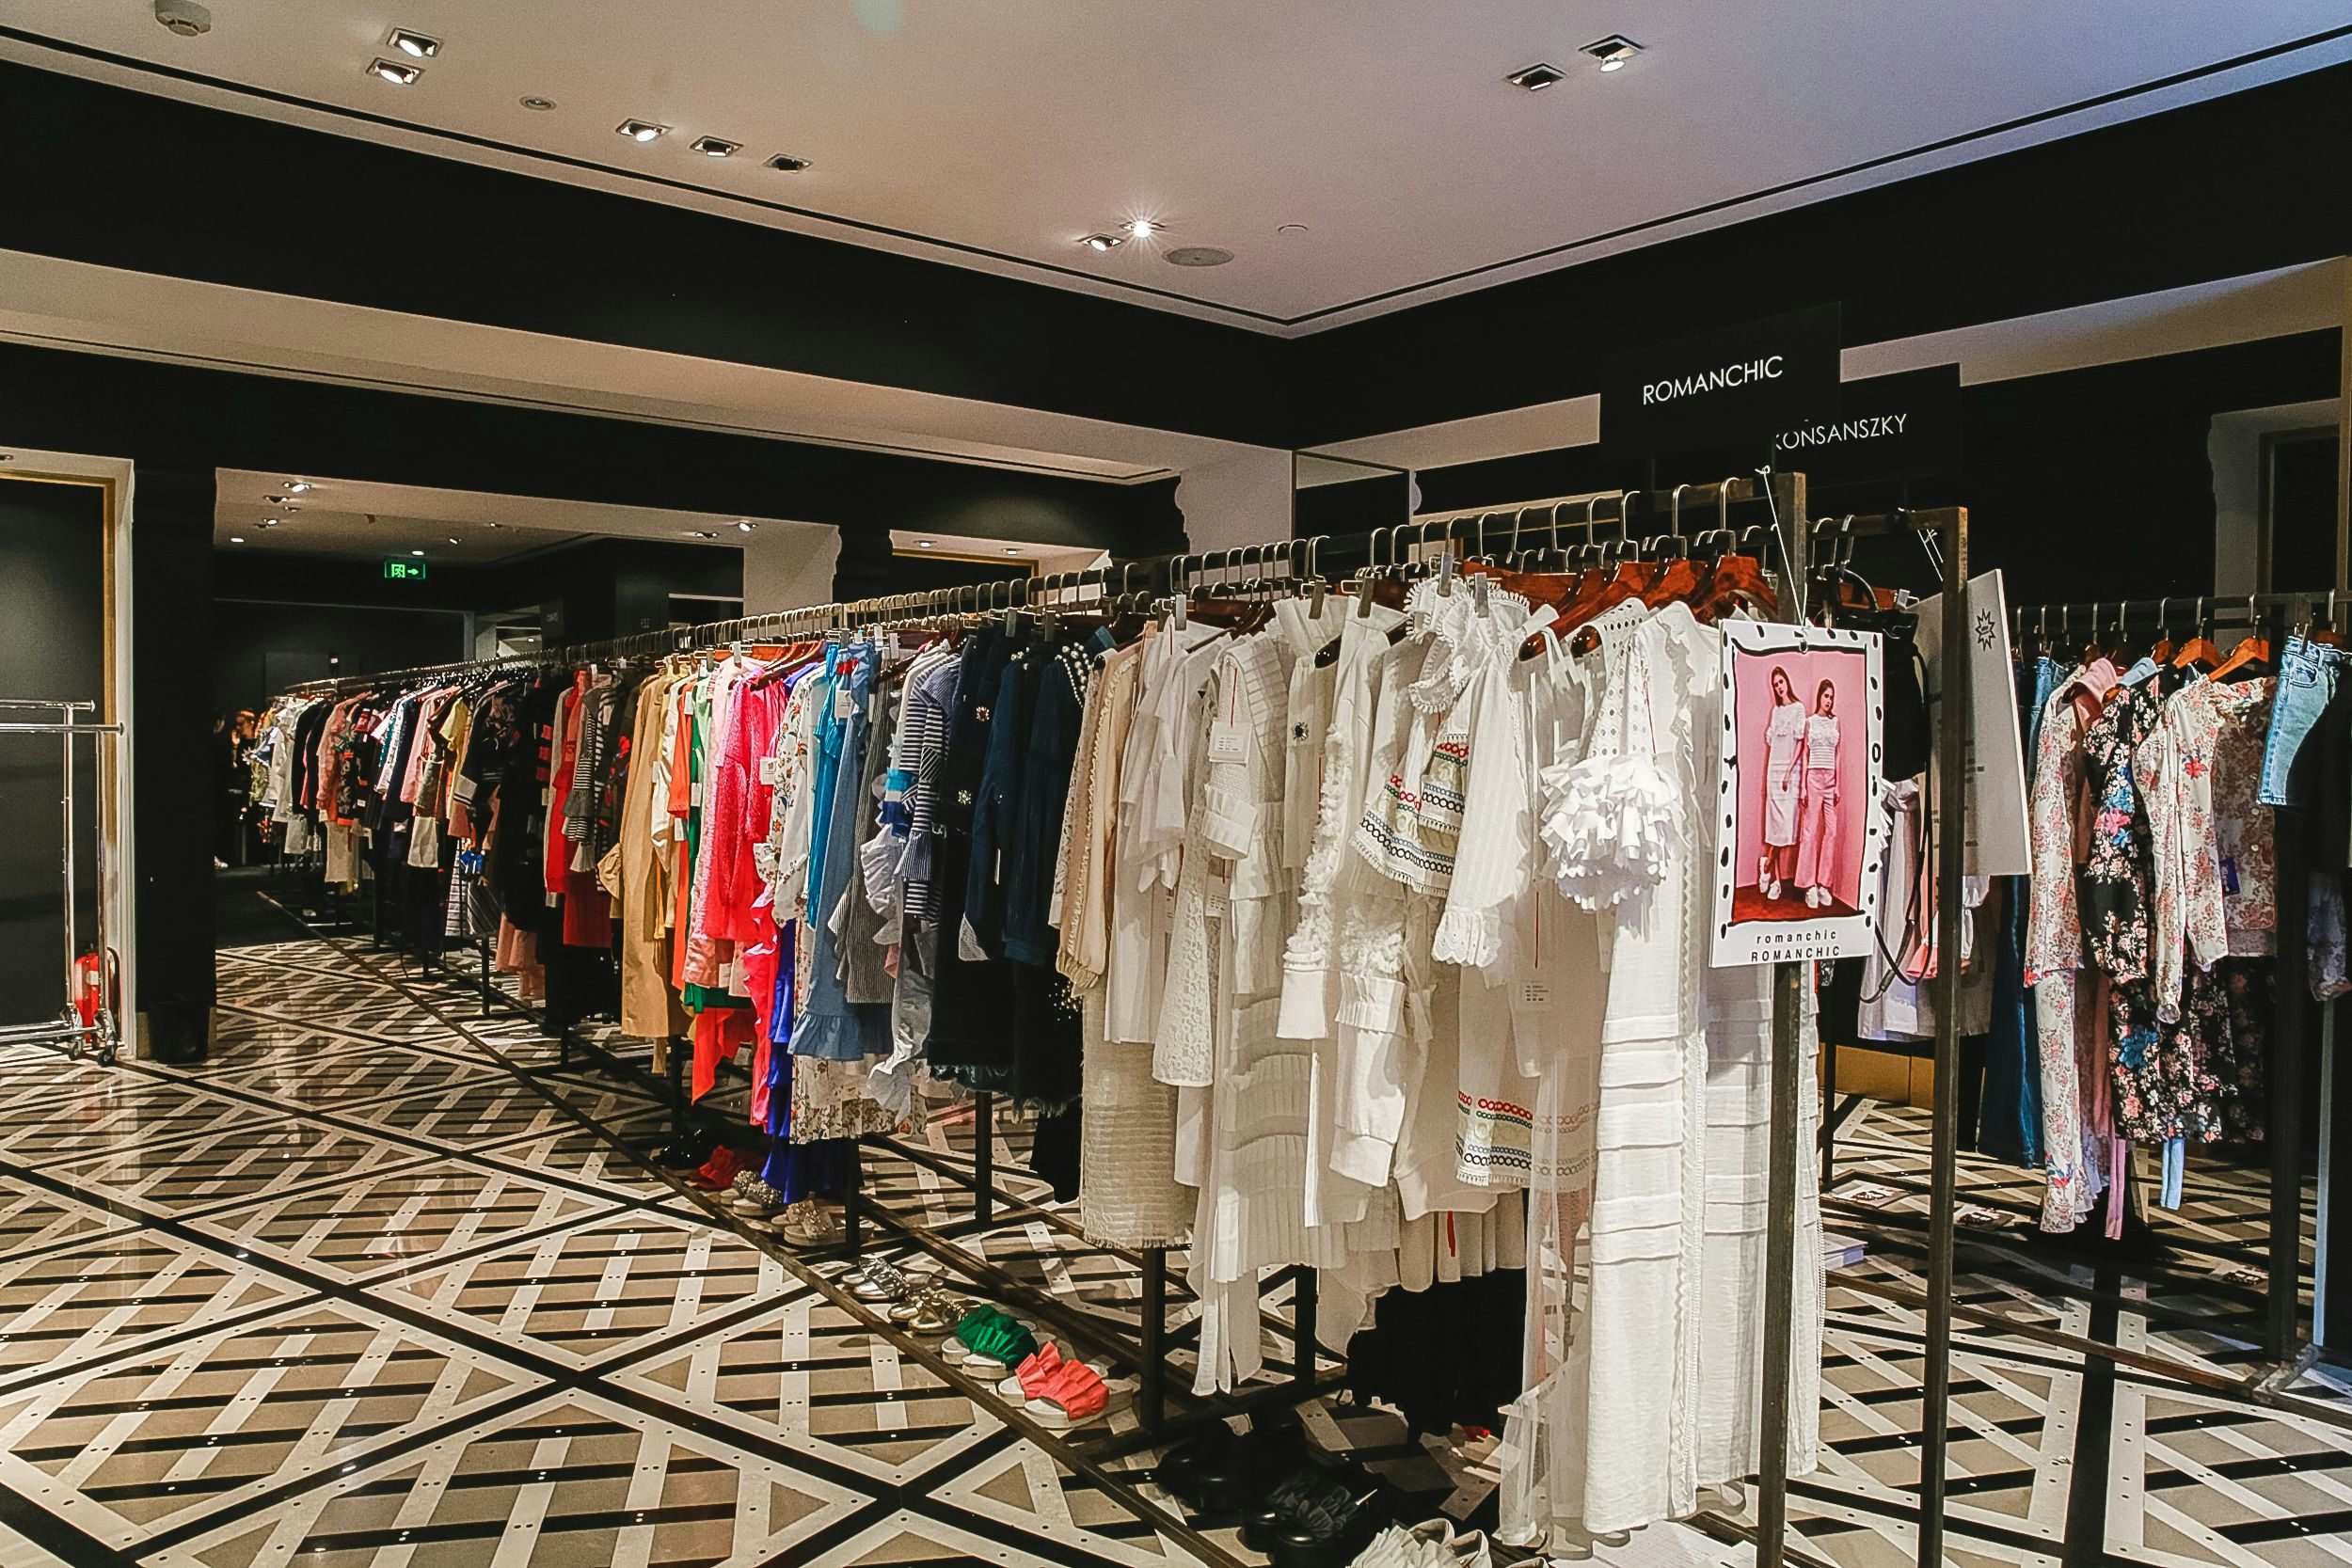 Niche Fashion Labels Bridge Gap Between High Street and High End in China